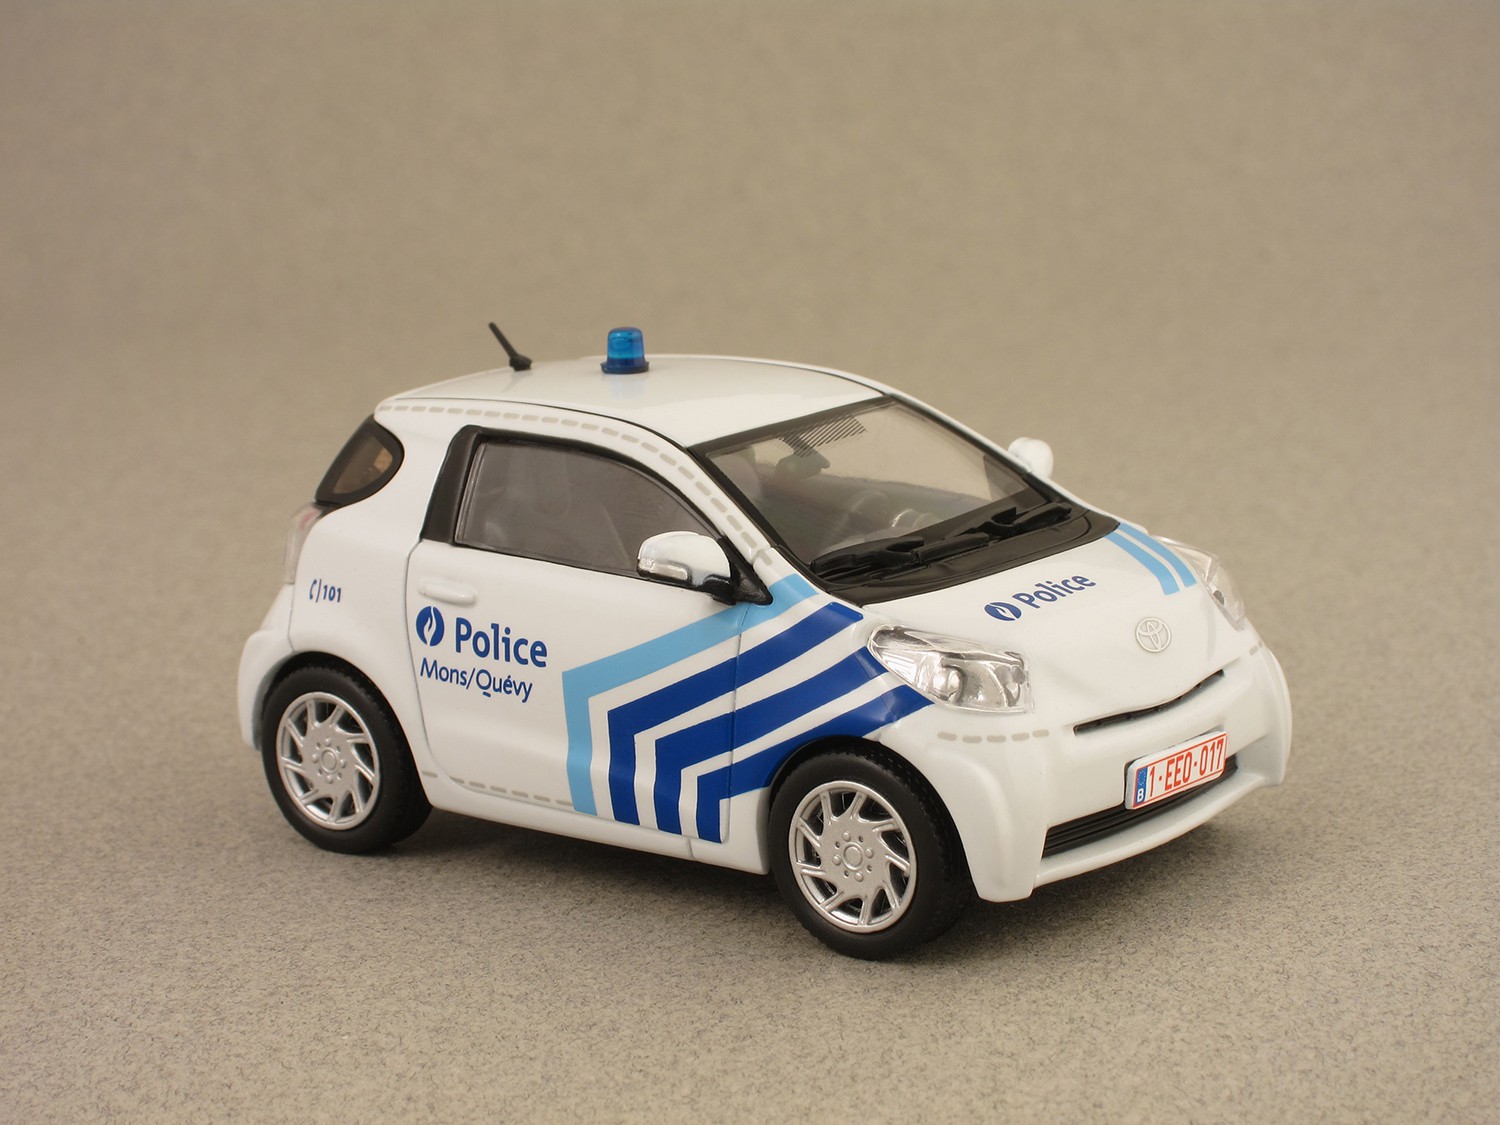 Toyota iQ Police (J-Collection) 1:43